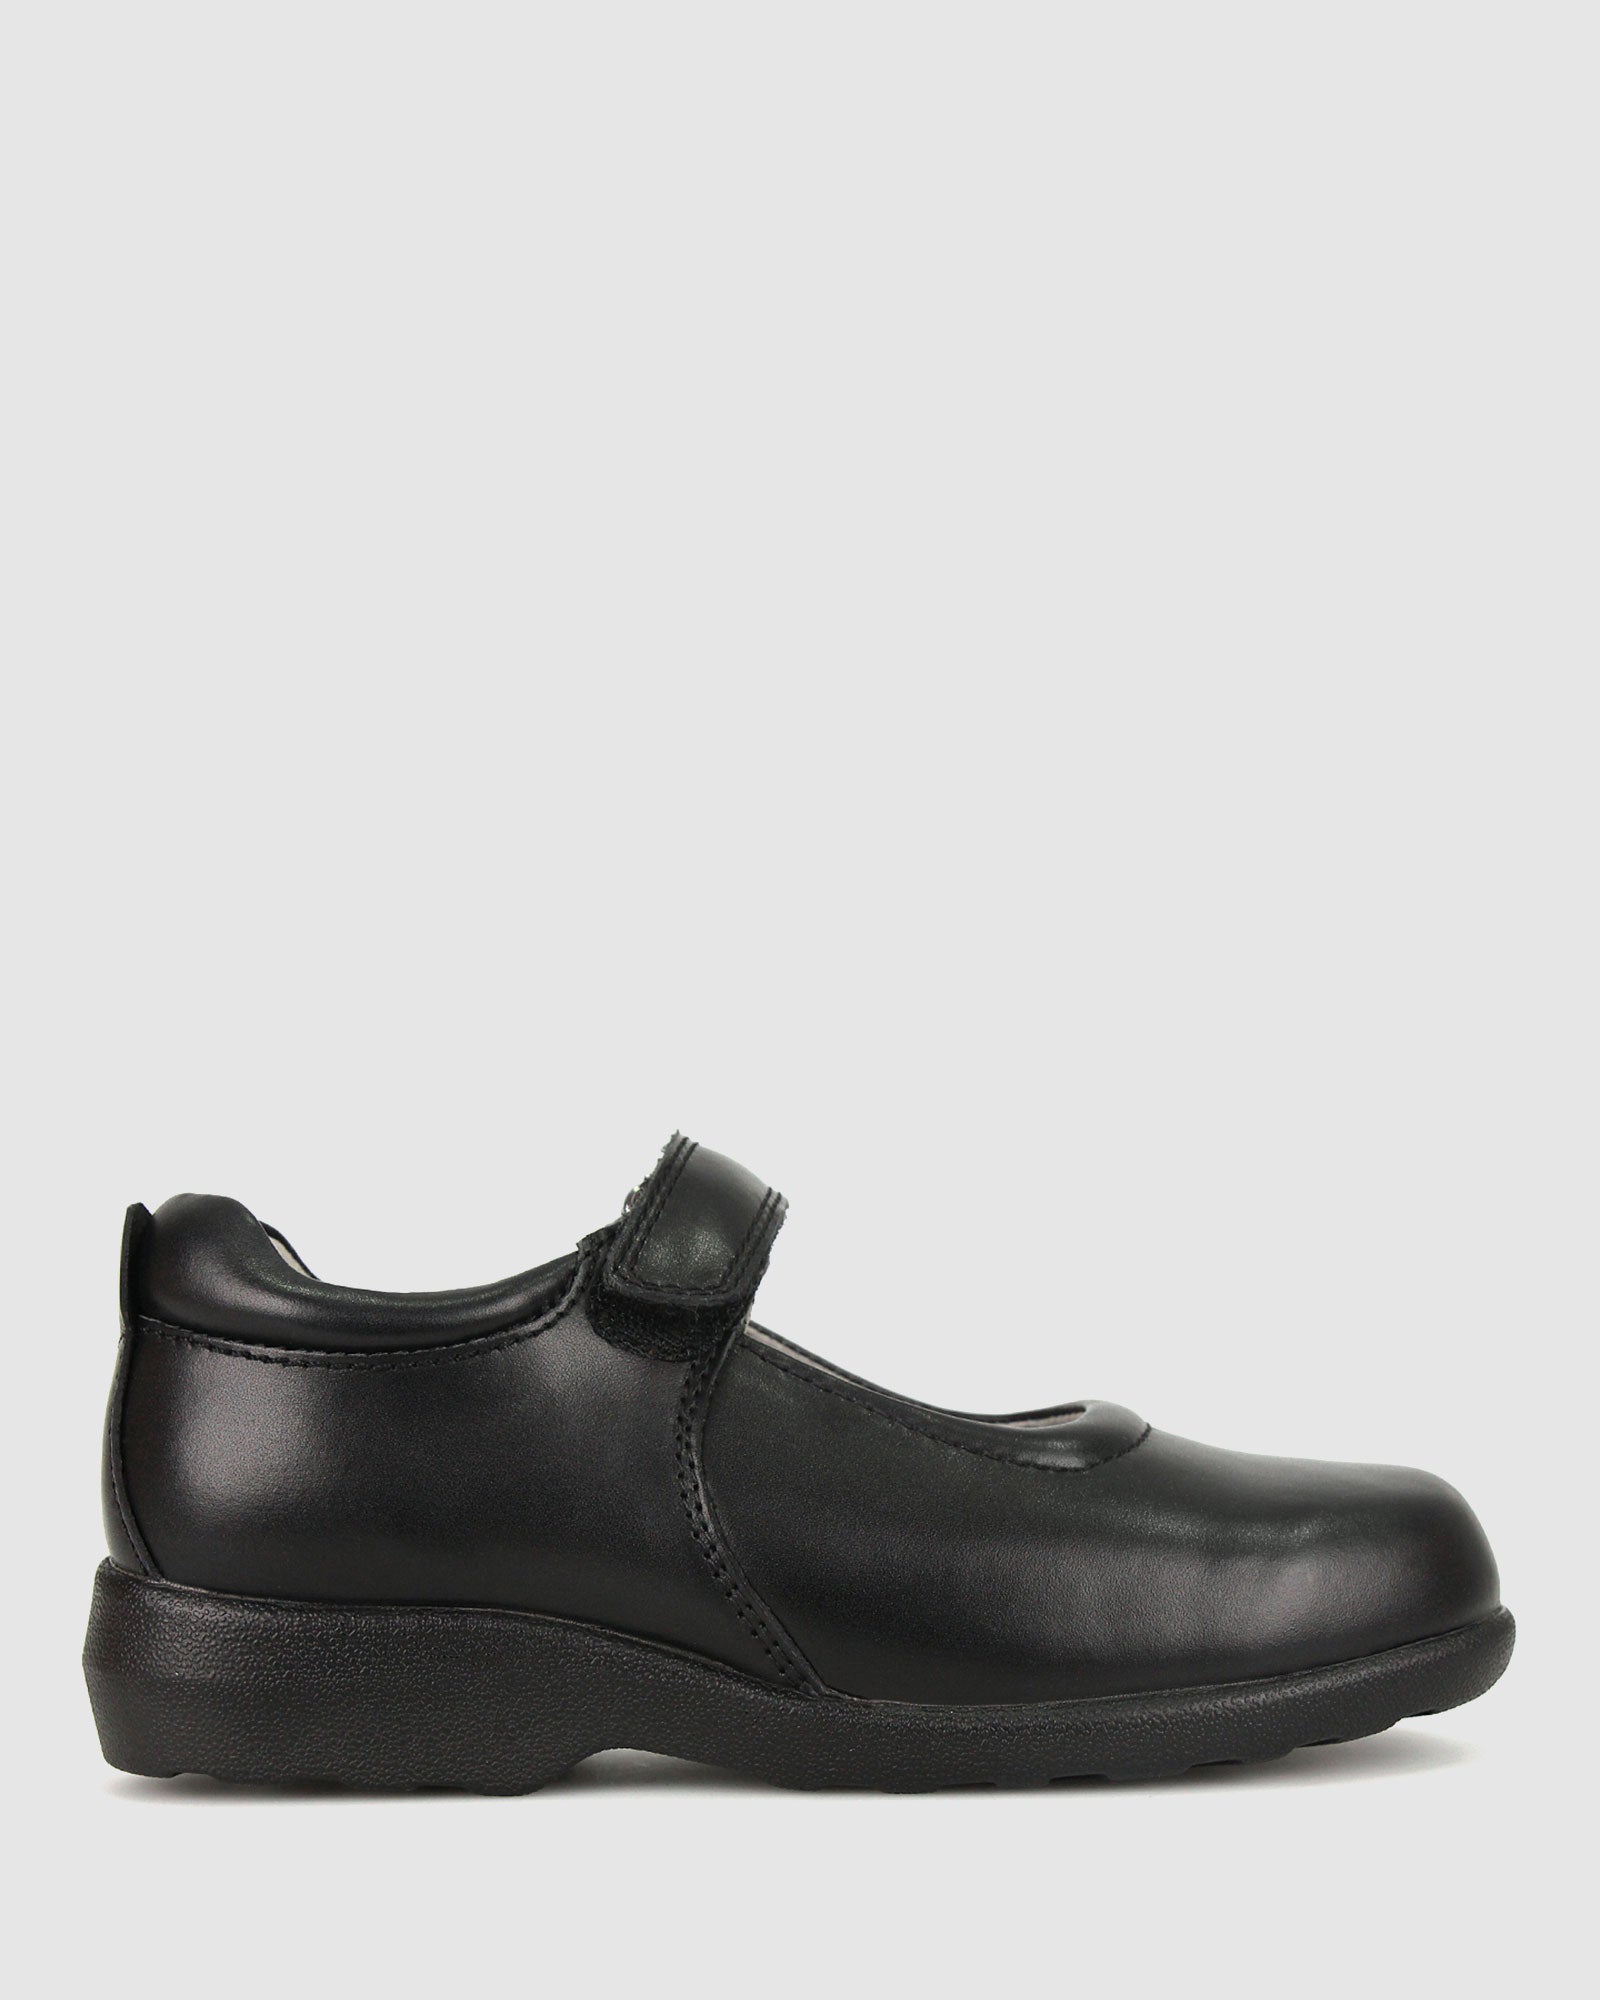 Buy SUBJECT D/E Girls Junior Leather School Shoes by Airflex online - Betts